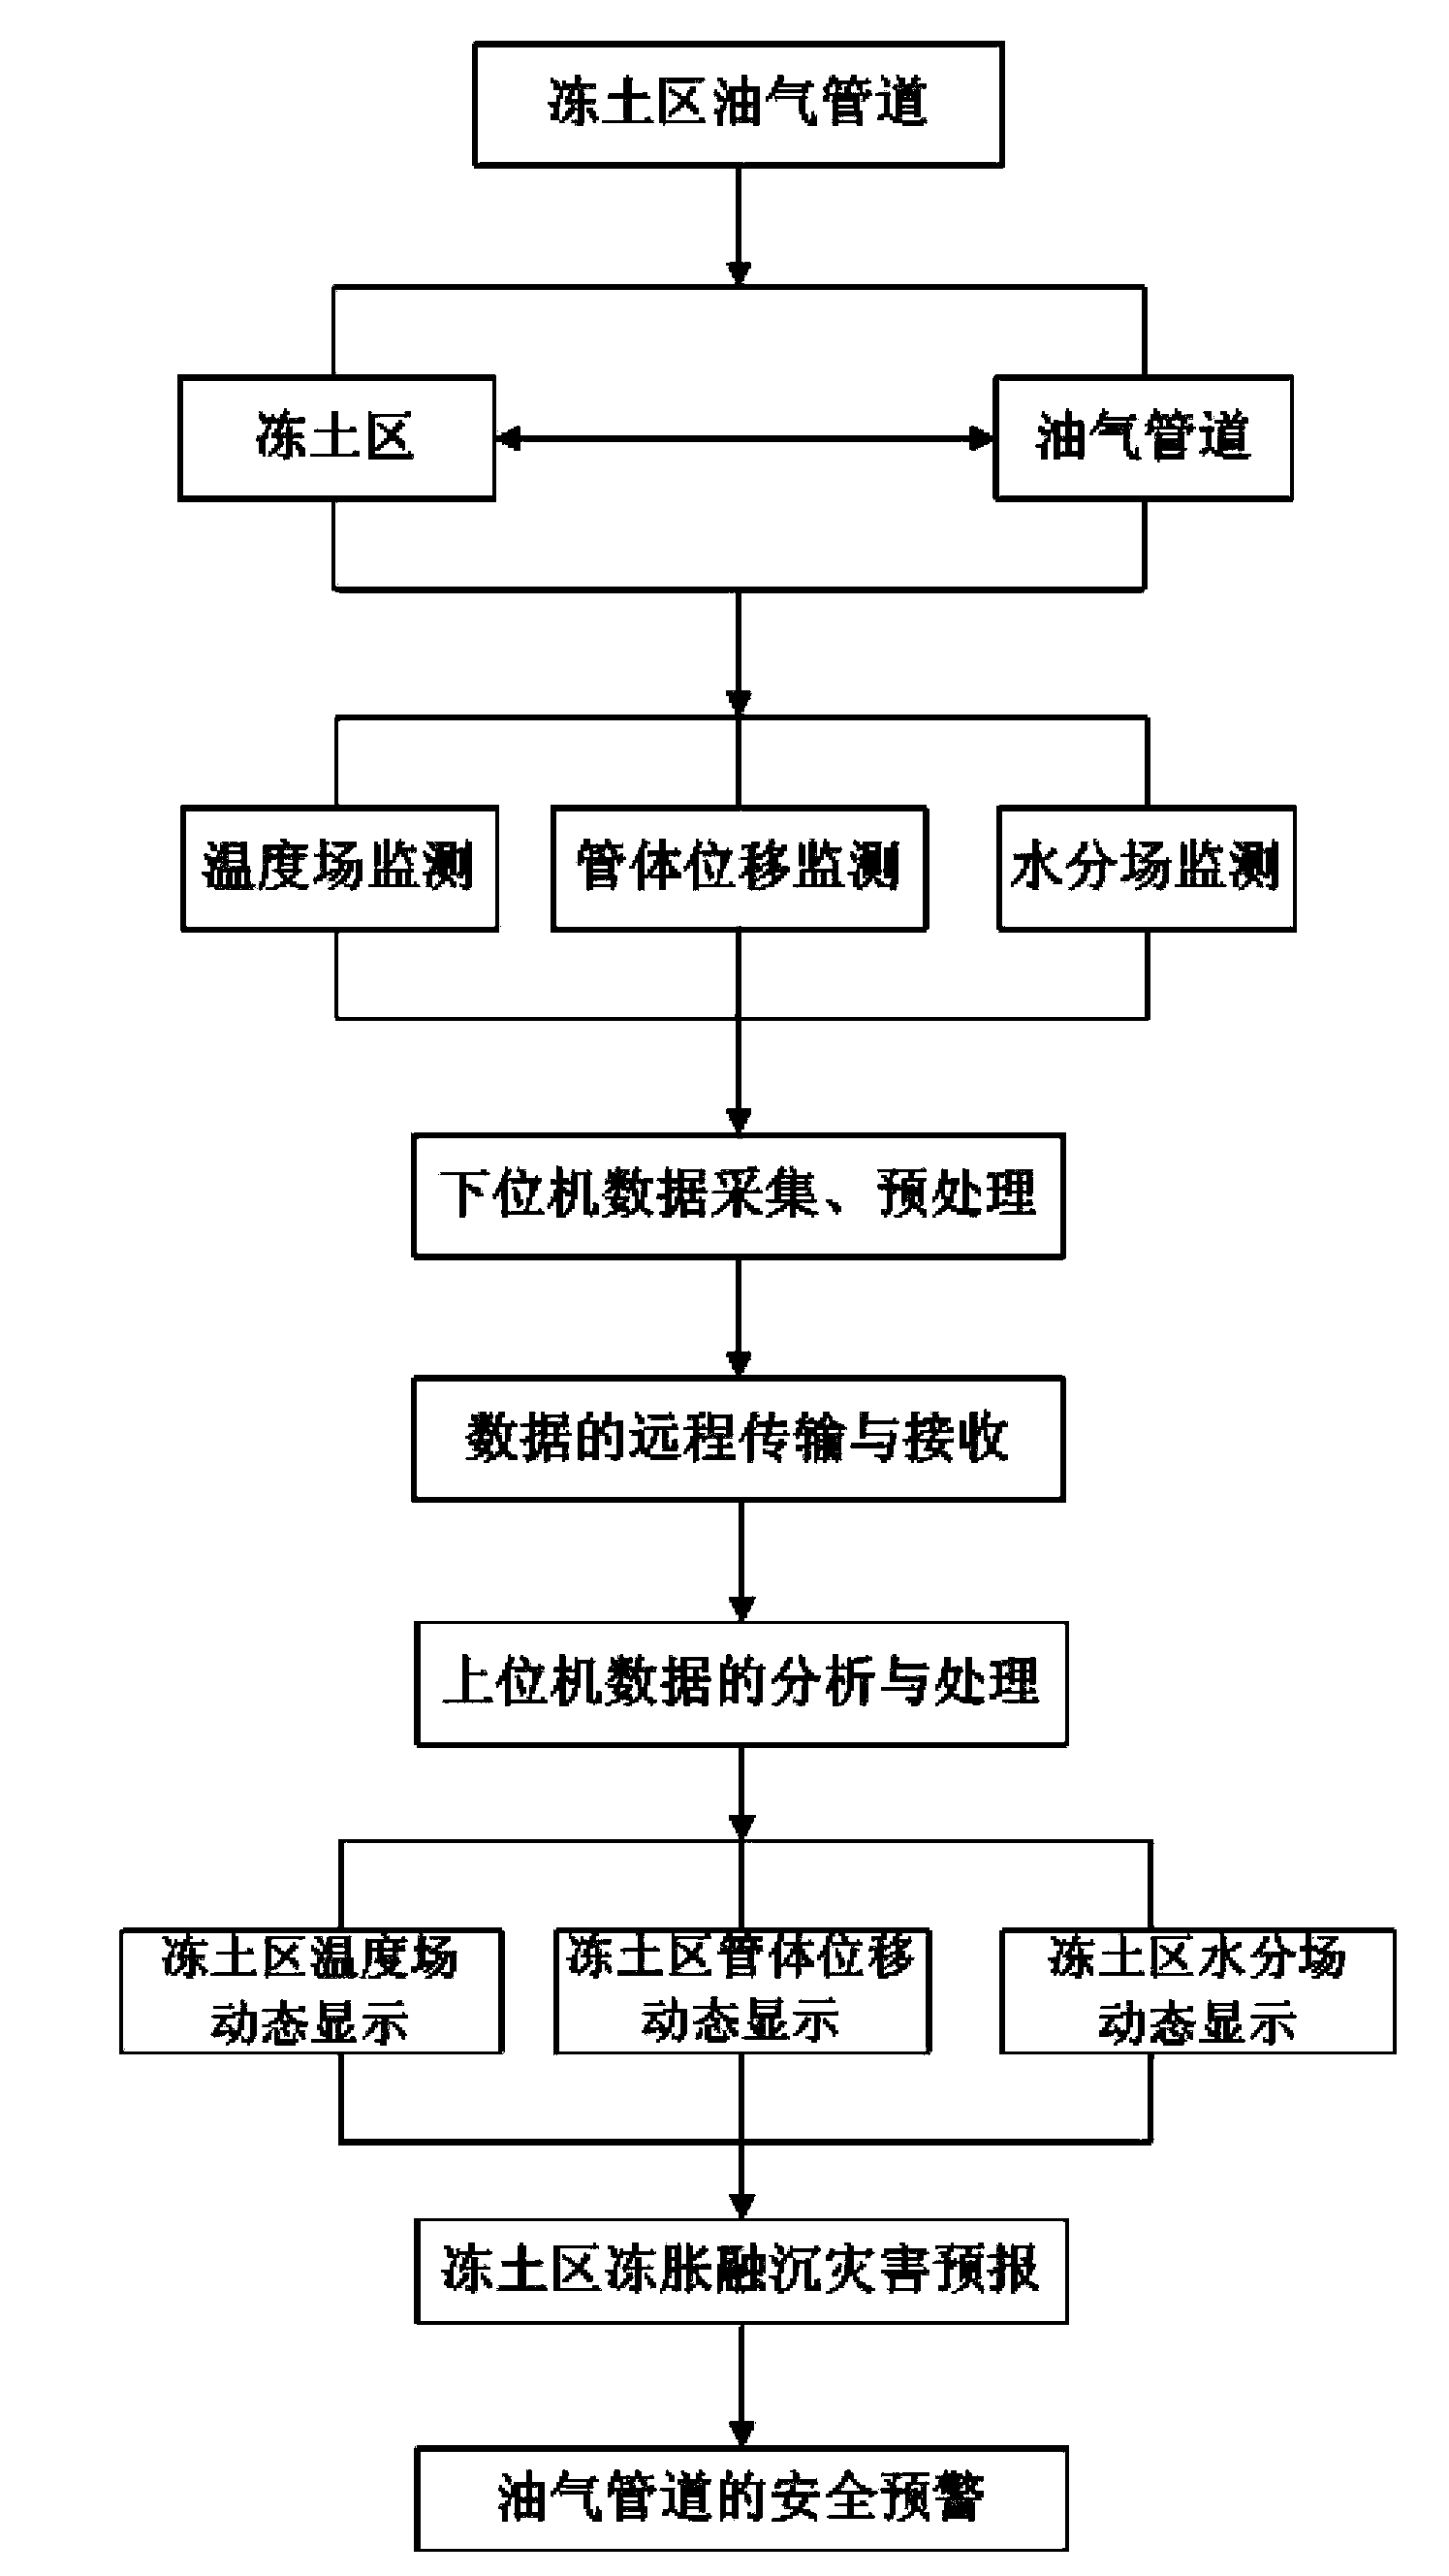 Freeze soil area oil and gas pipeline monitoring method and system